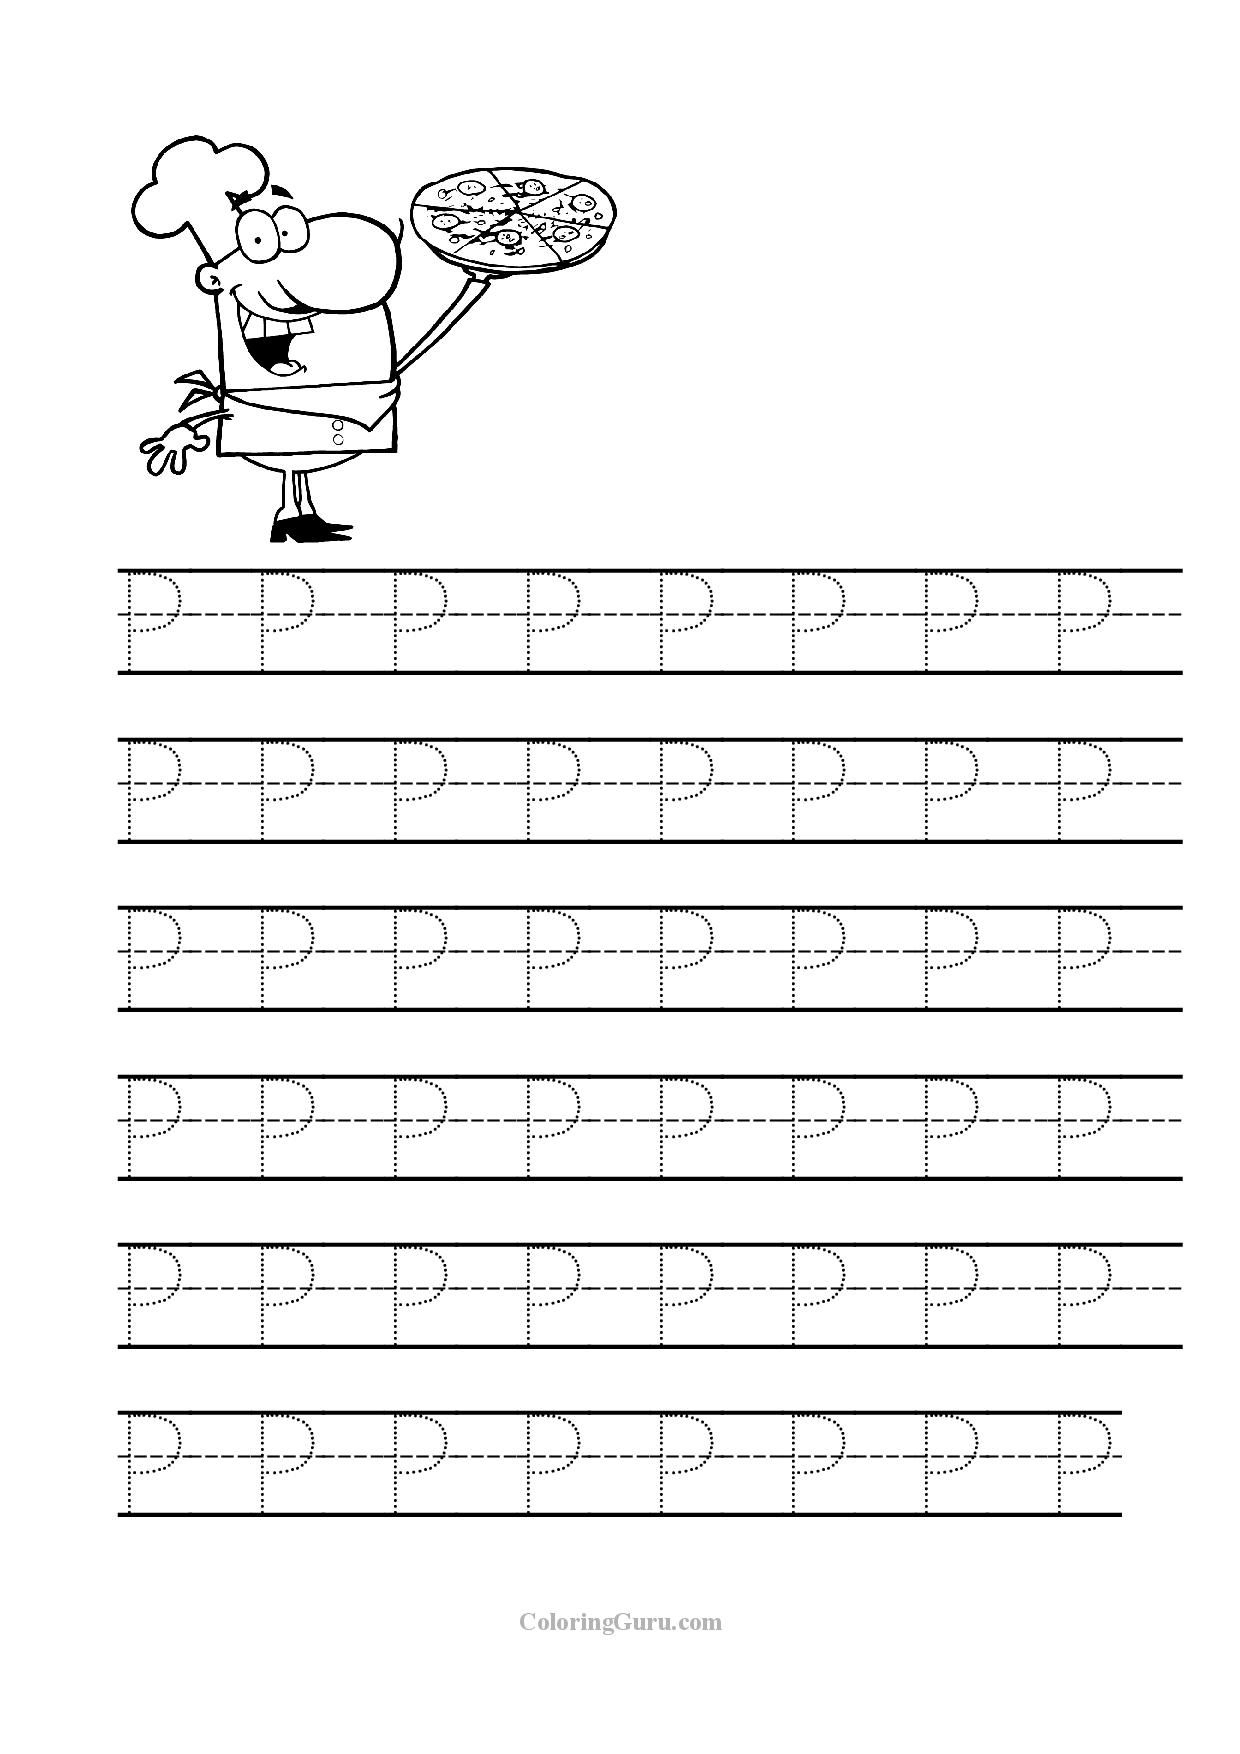 Free Printable Tracing Letter P Worksheets For Preschool | Tracing | Free Printable Letter P Worksheets